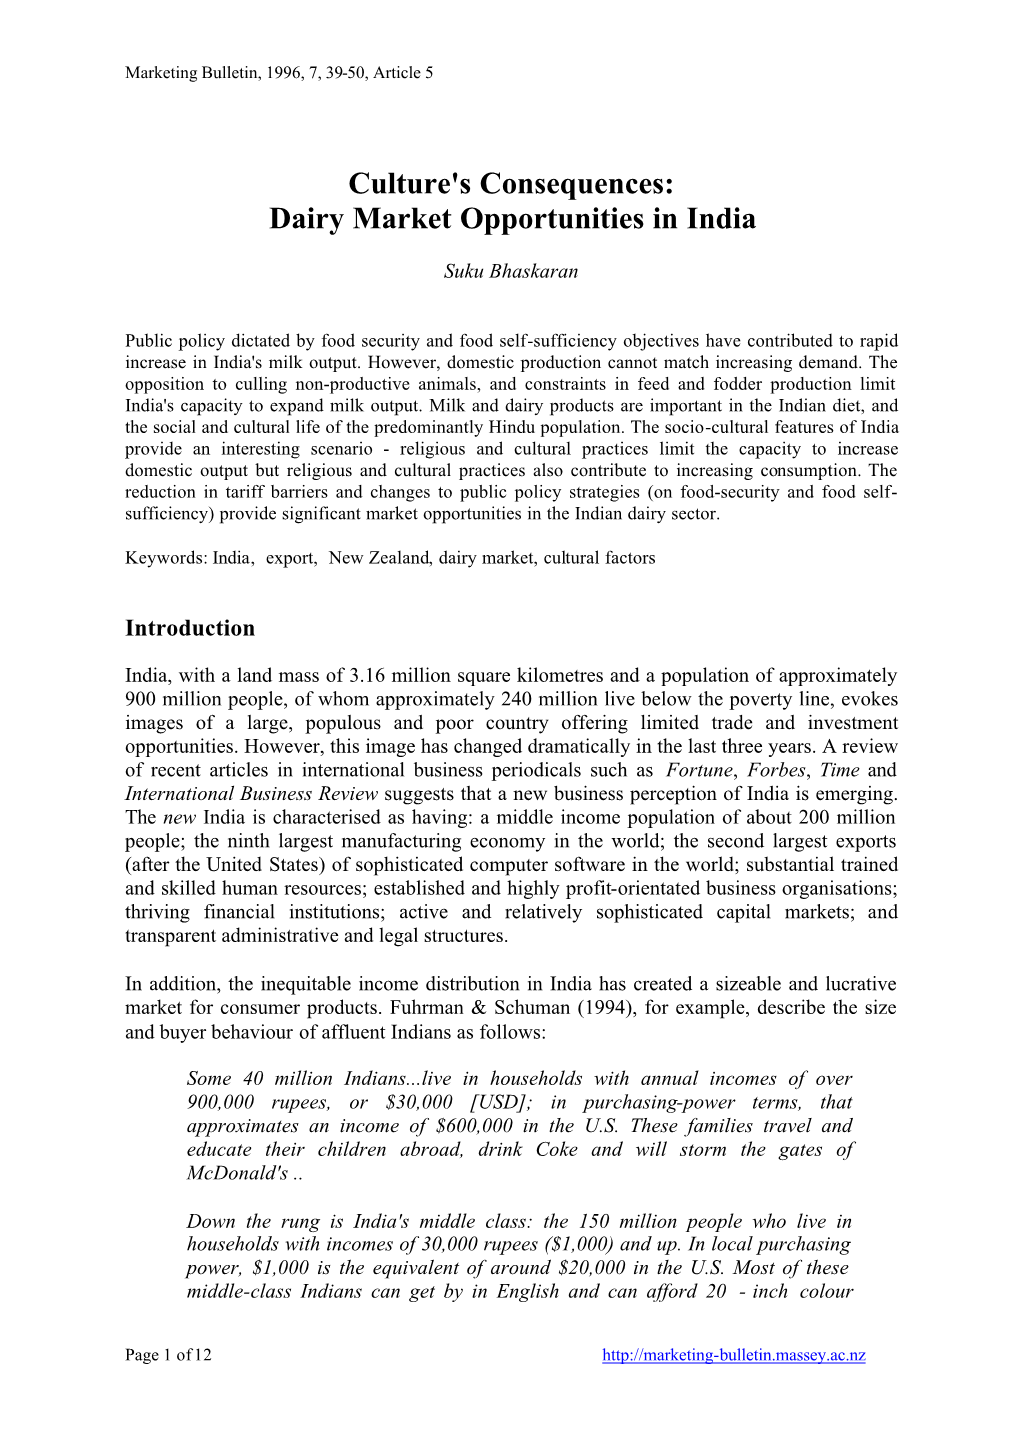 Culture's Consequences: Dairy Market Opportunities in India. Suku